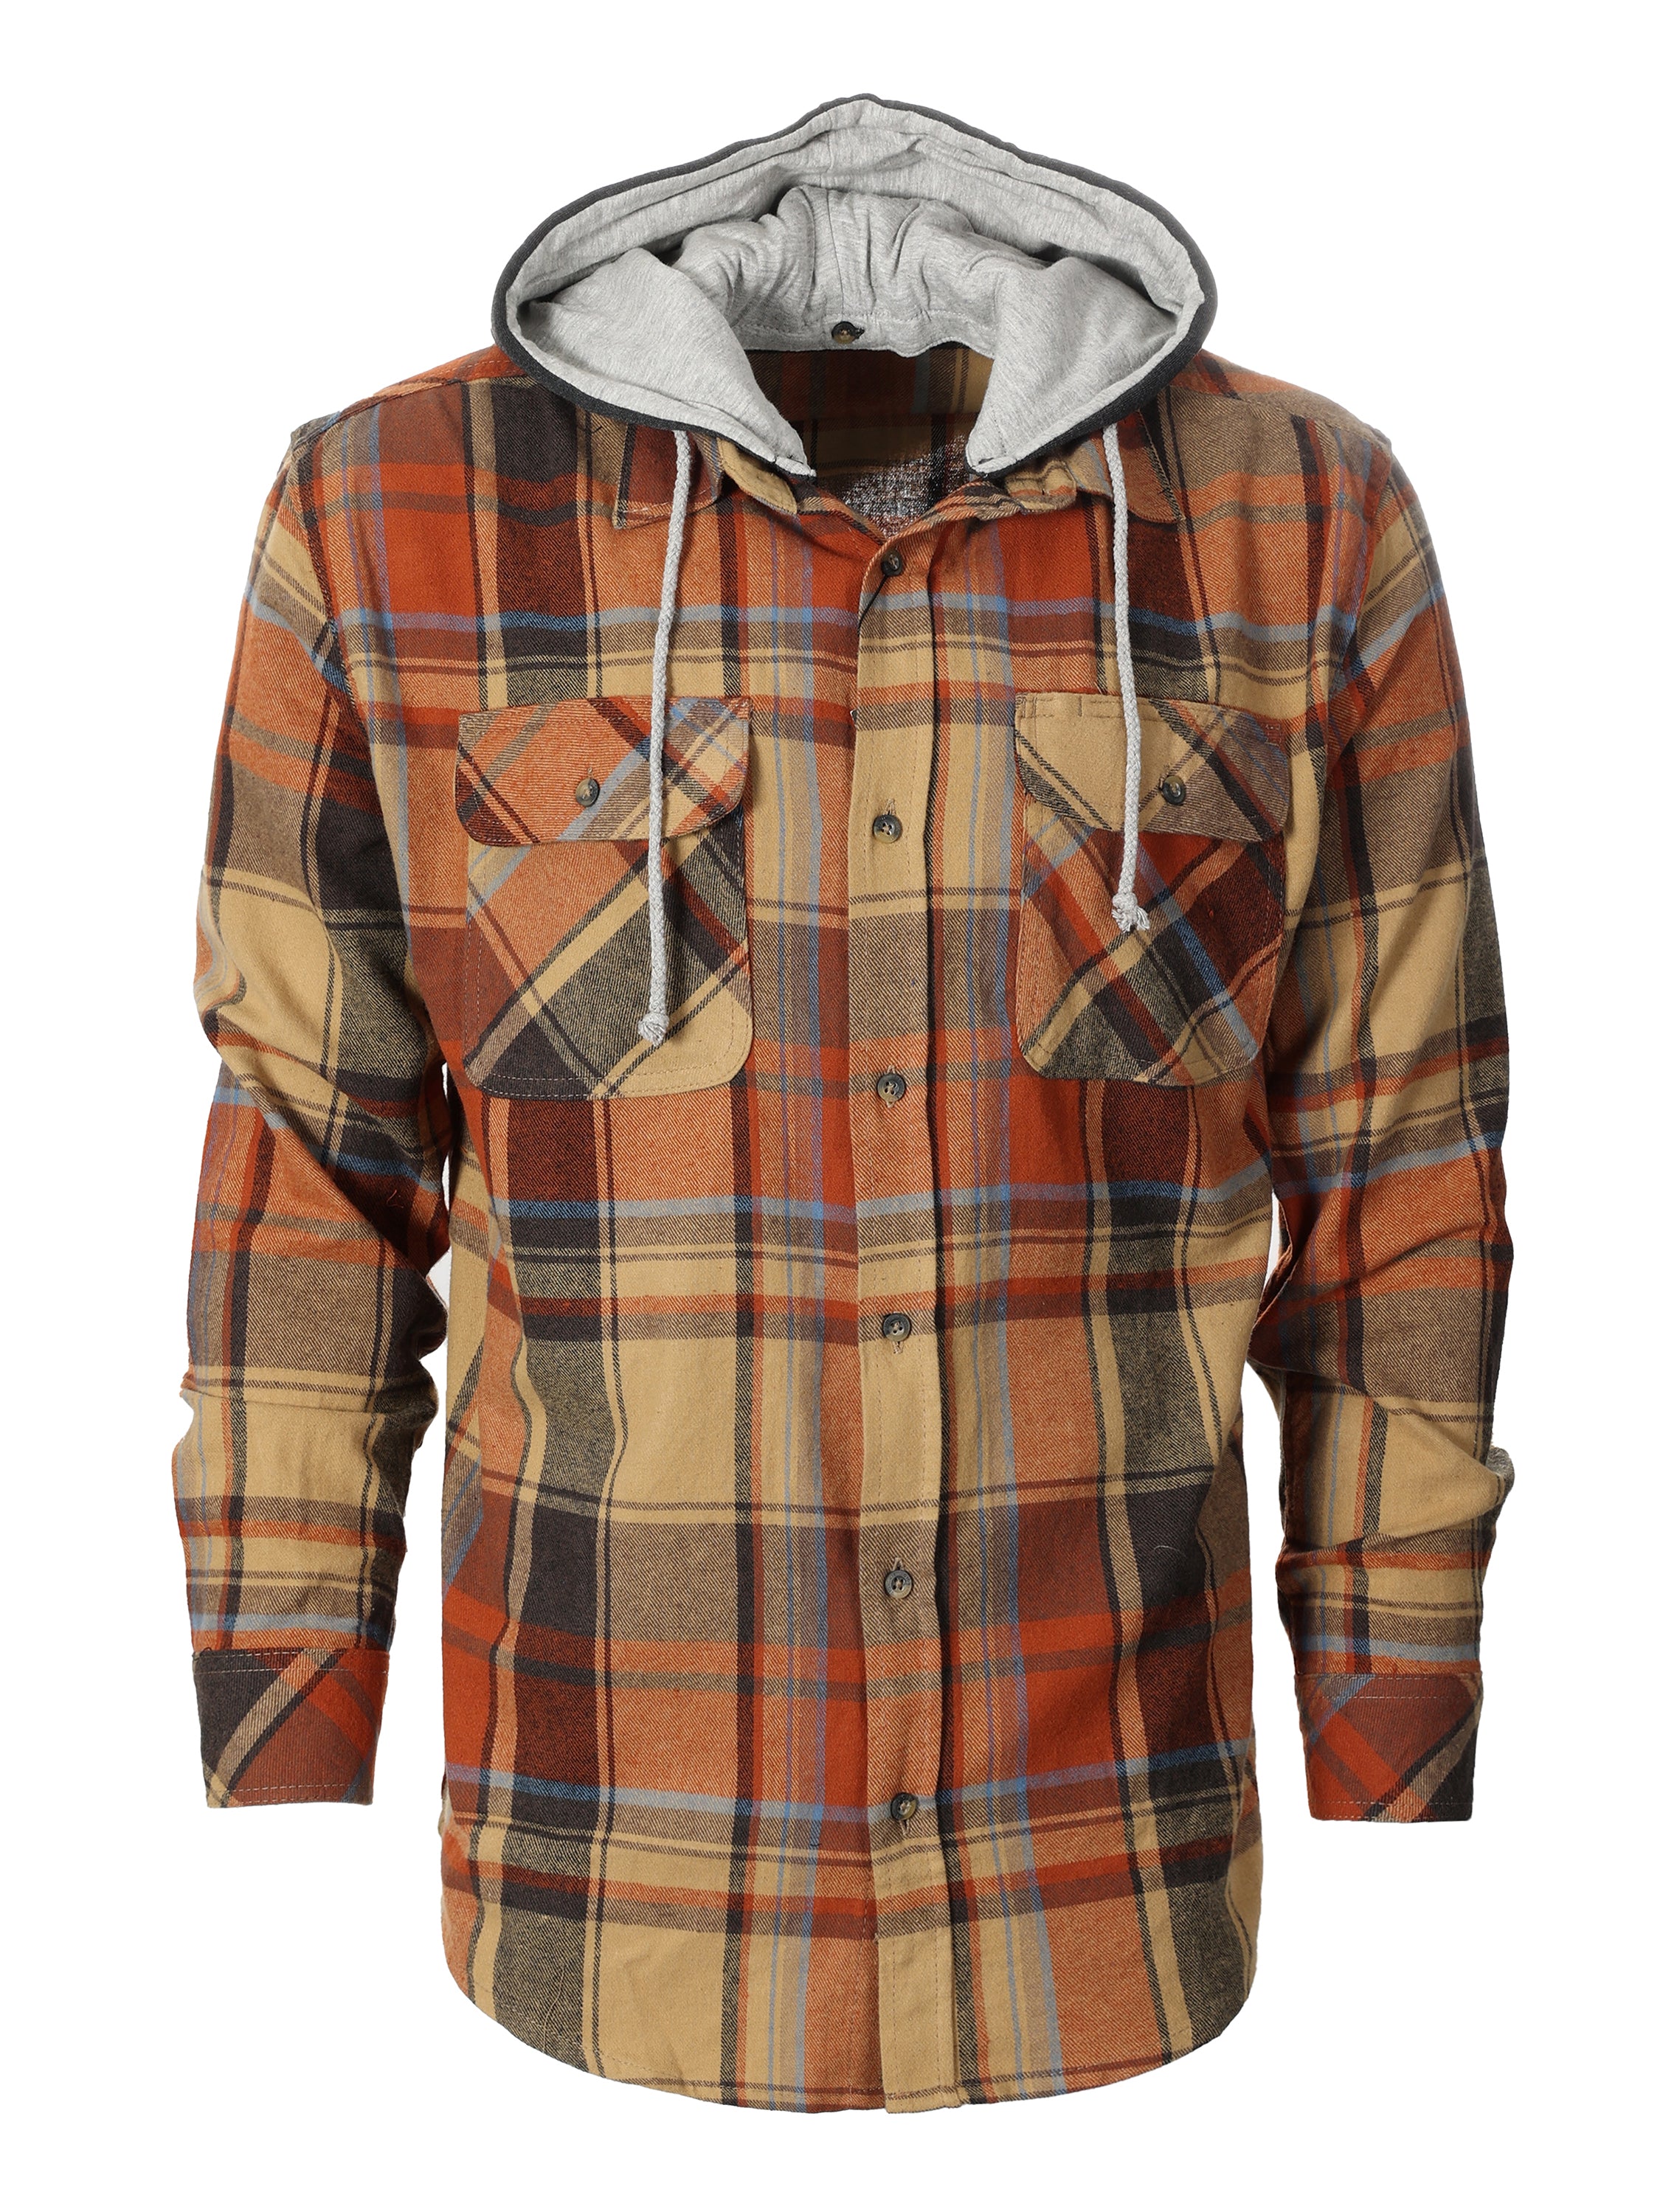 title:Gioberti Men's Khaki / Umber Removable Hoodie Plaid Checkered Flannel Button Down Shirt;color:Khaki / Umber